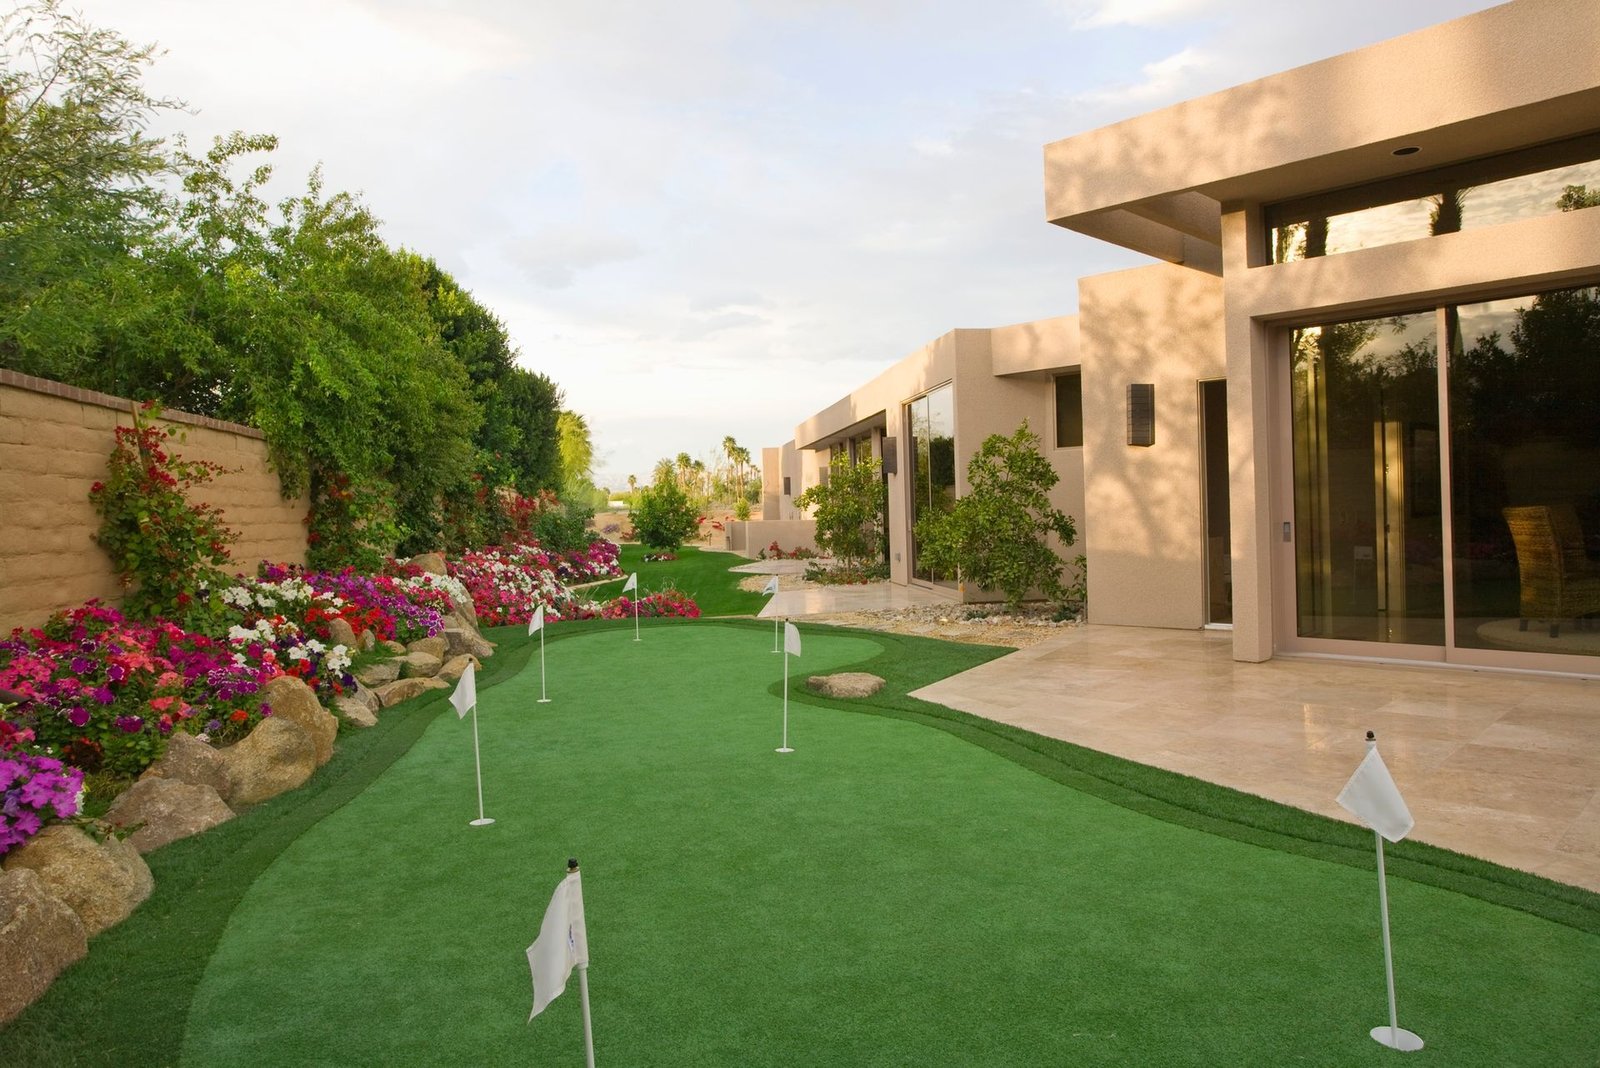 A modern home with large glass doors opens up to a well-manicured St. Petersburg outdoor space featuring a putting green with several holes marked by white flags. Adorned with vibrant flower beds and greenery along a stone pathway, the landscaping was crafted by licensed and insured turf pros.